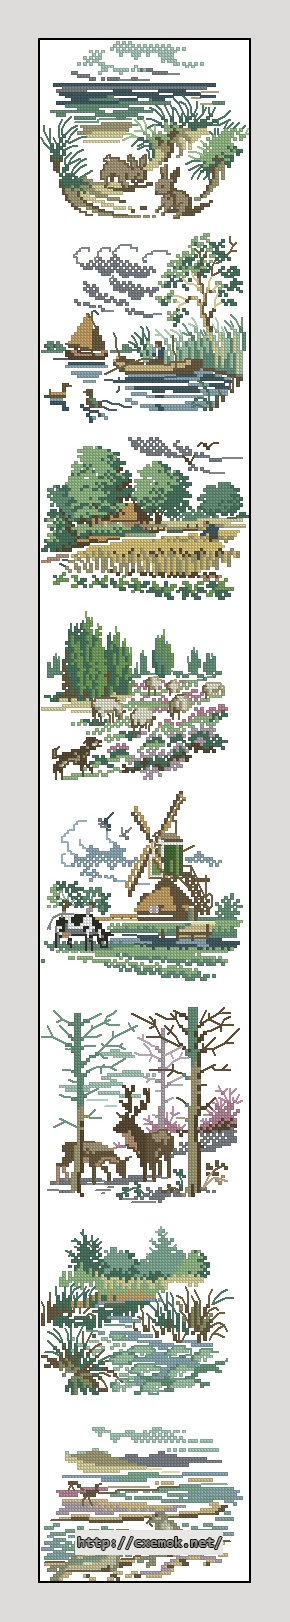 Download embroidery patterns by cross-stitch  - Bellpull, author 